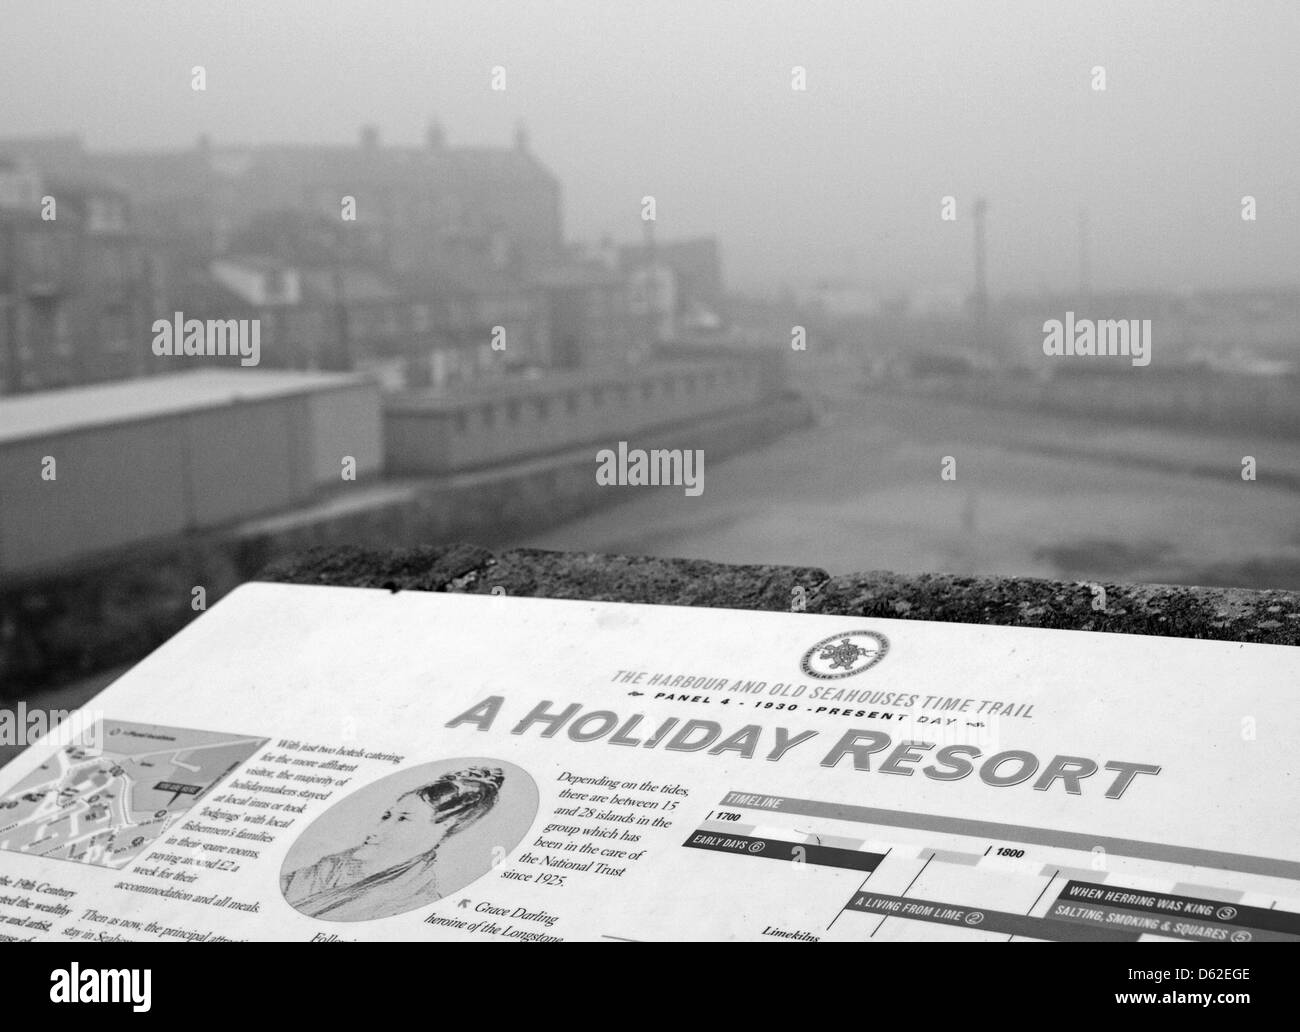 Close up of an information panel advertising a 'Holiday Resort' with the background showing a grey overcast day. Stock Photo